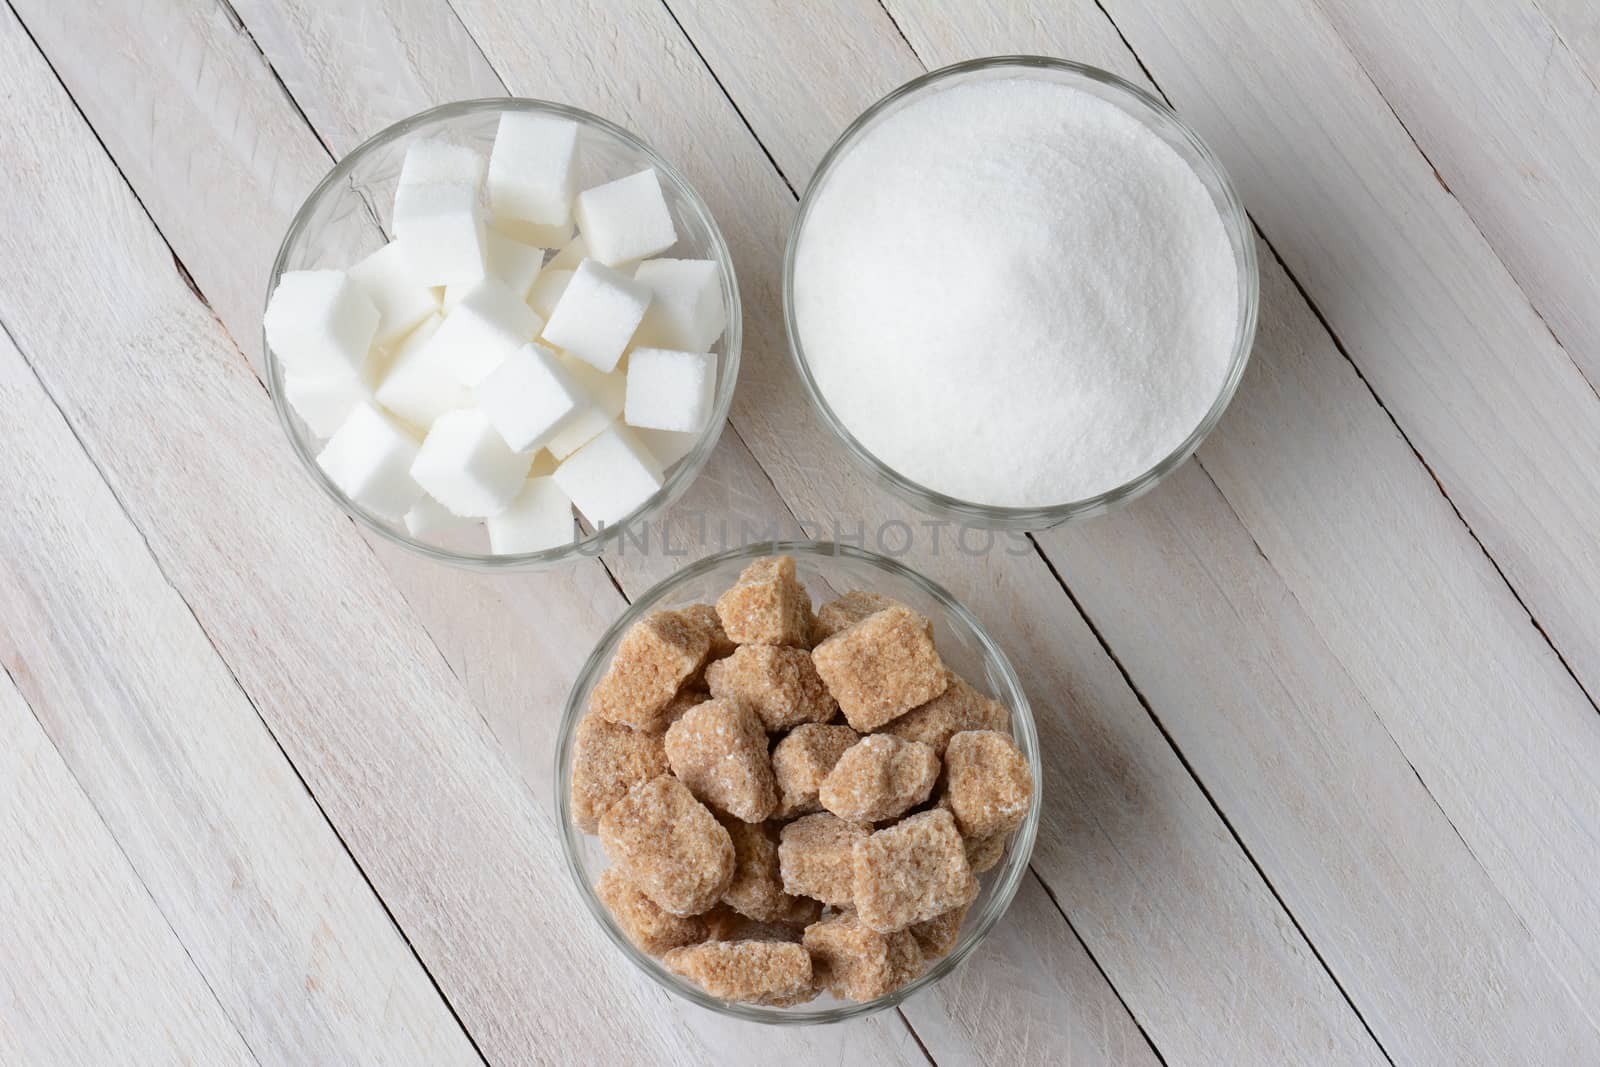 Three glass bowls filled with granulated sugar, white sugar cubes and natural sugar chunks. High angle view on a rustic wood kitchen table.